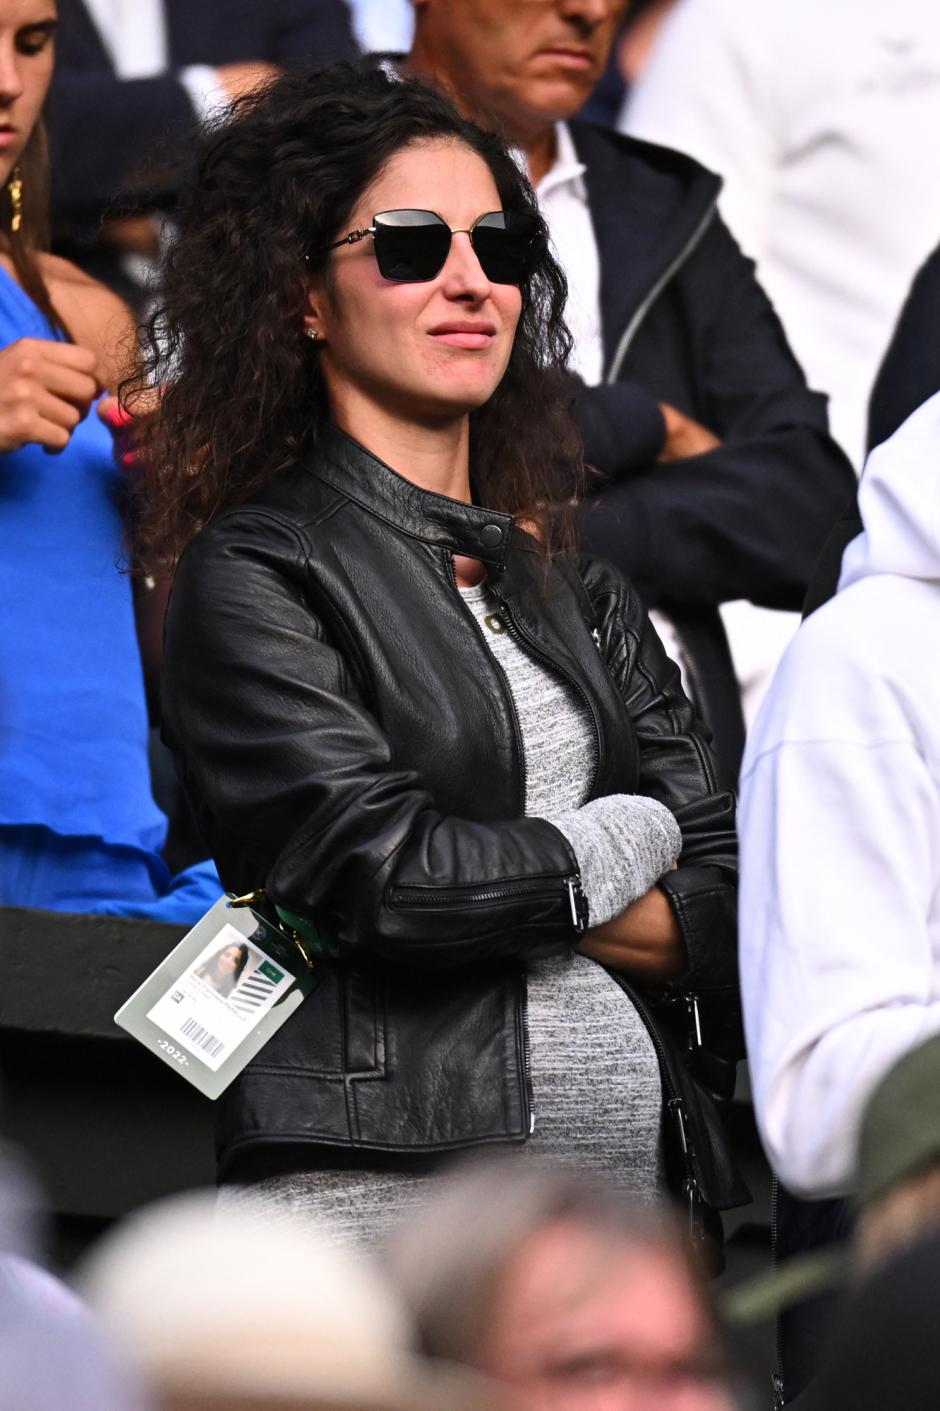 Xisca Perello at the 2022 Wimbledon Championships in London, UK, on July 6, 2022.